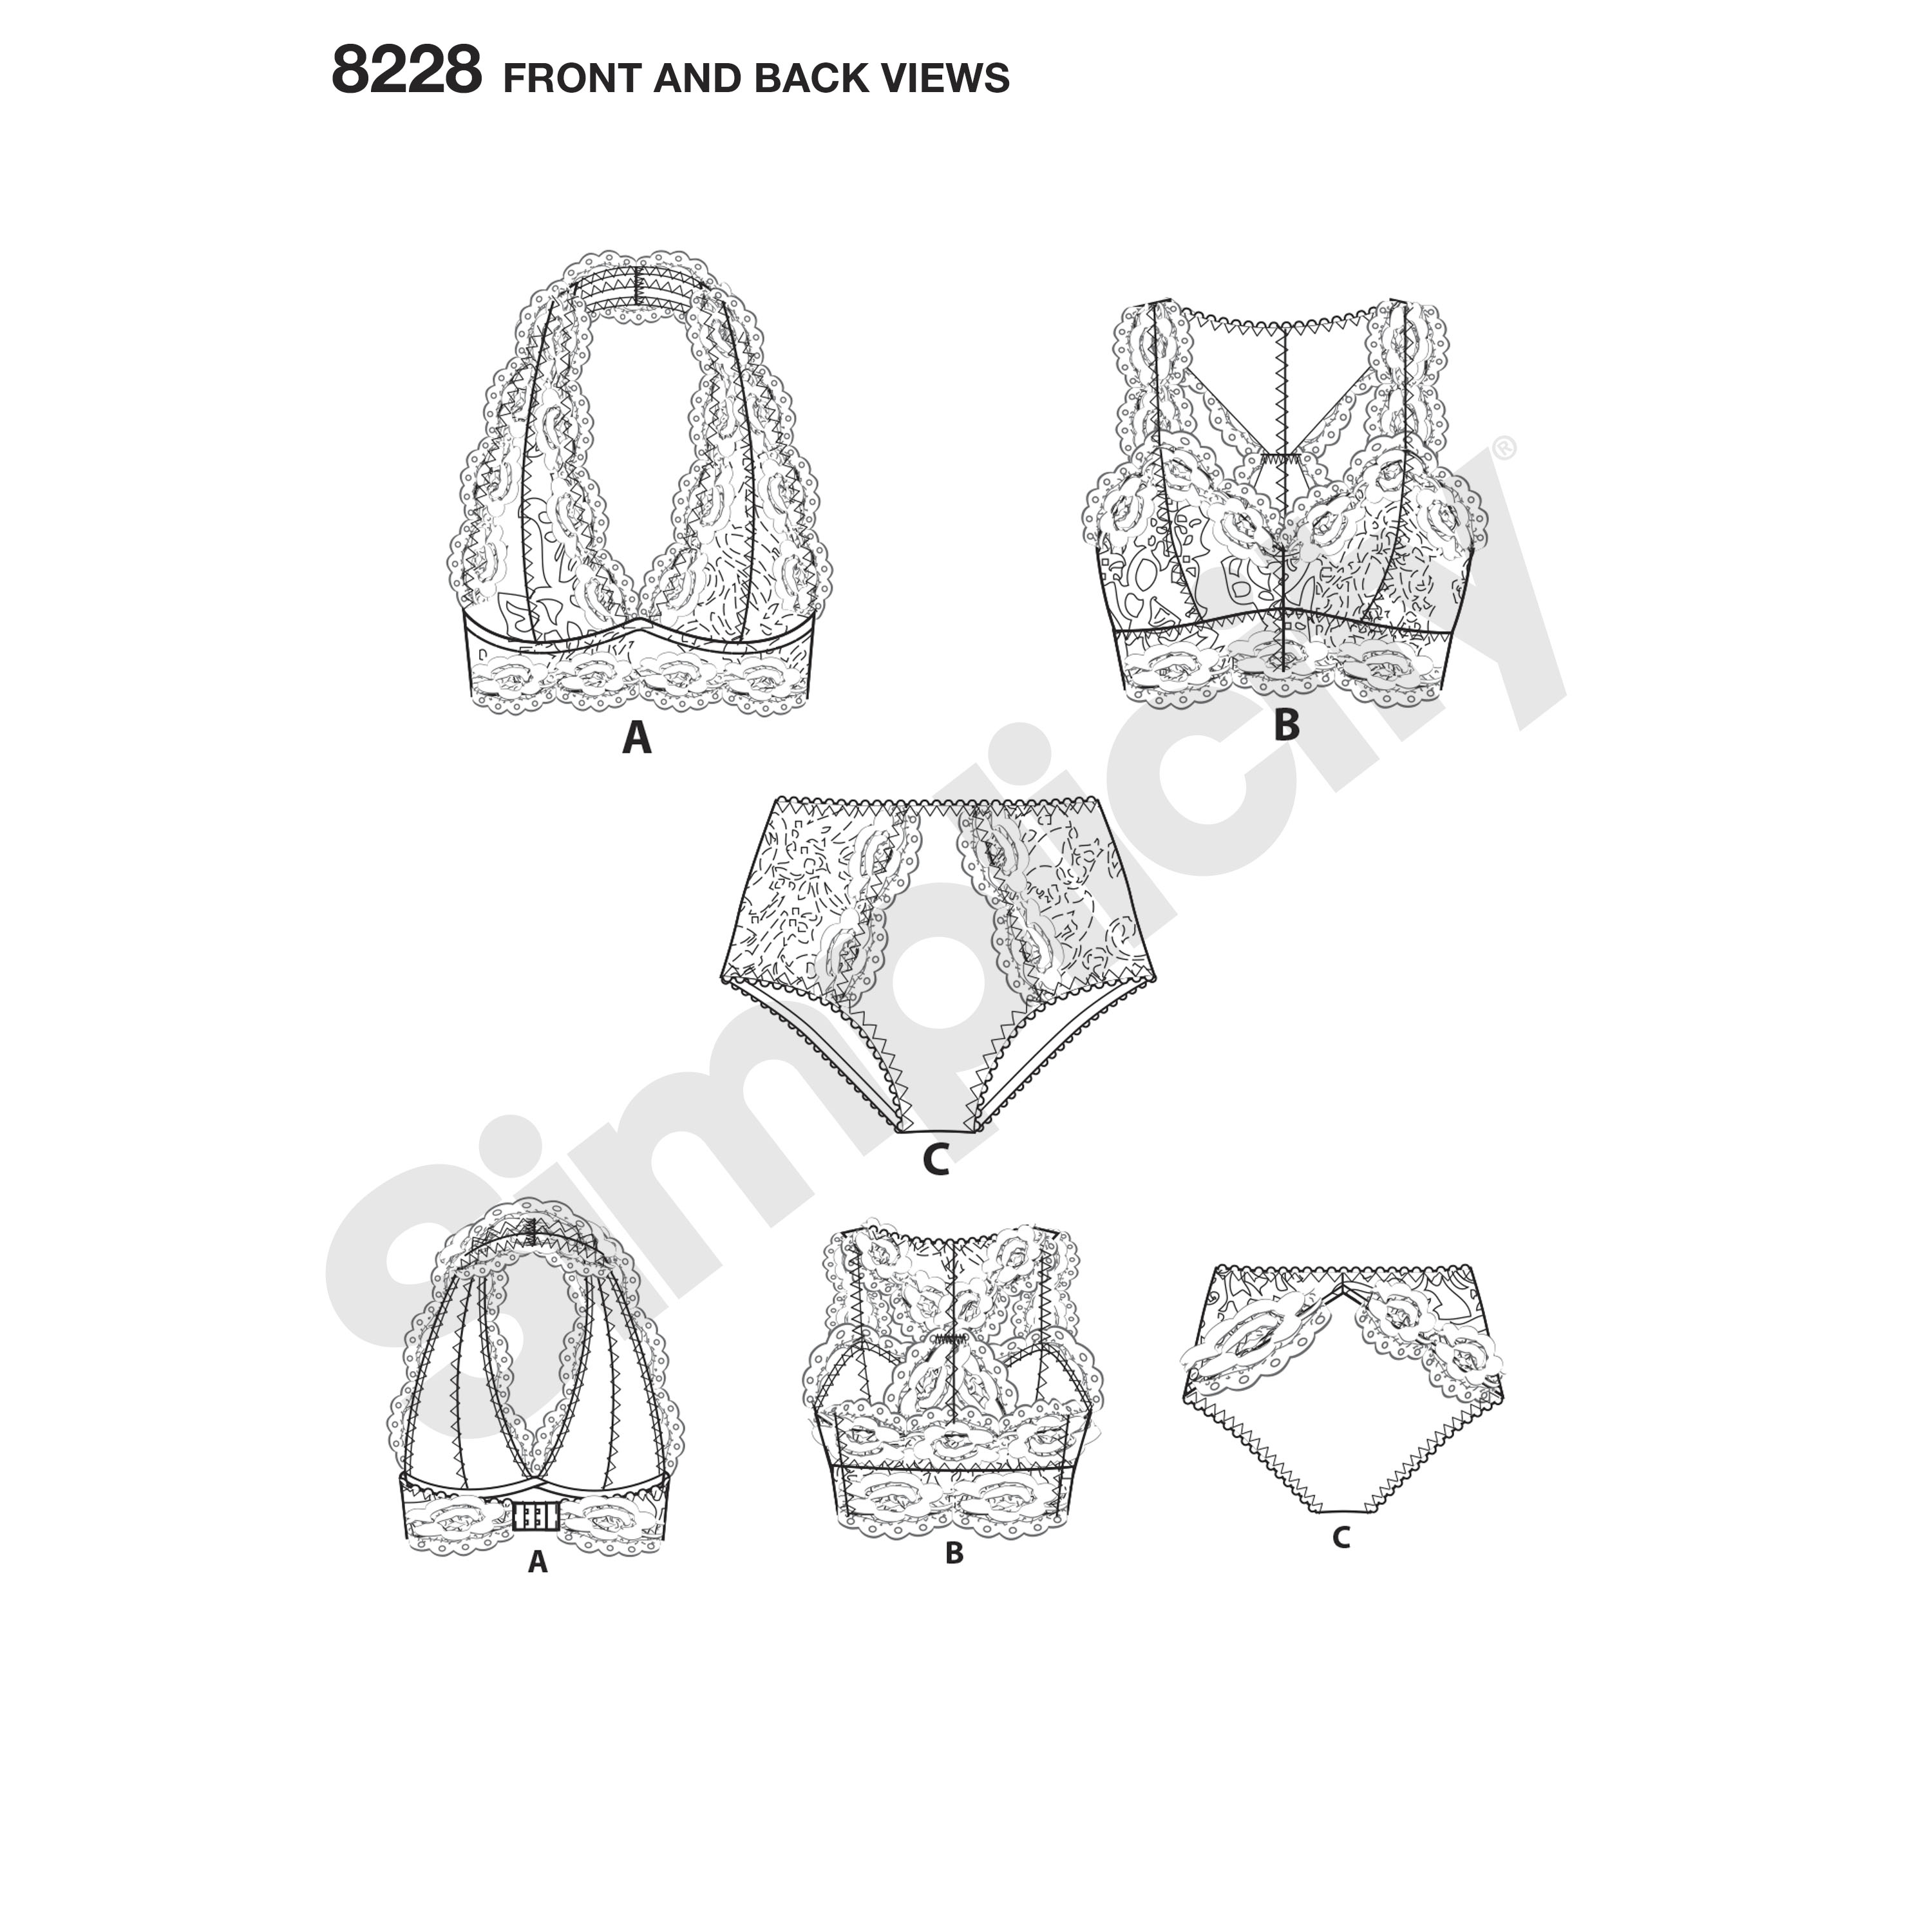 Uncut Simplicity Sewing Pattern 749 8228 New Misses' Soft Cup Bras